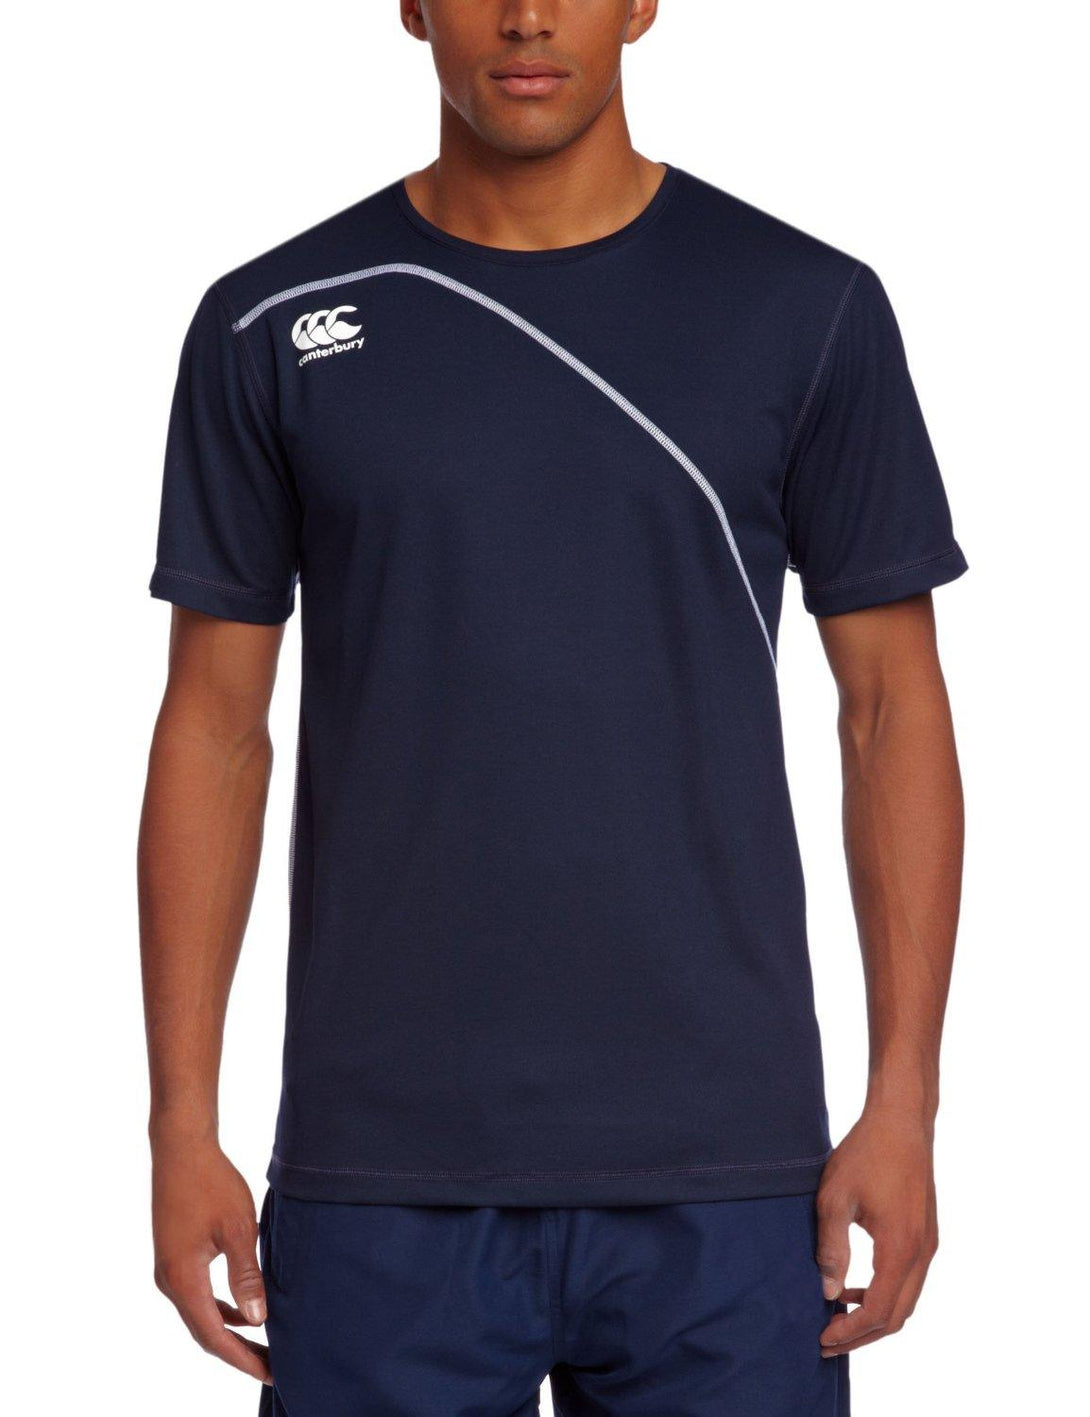 Rugby Heaven Canterbury Mercury TCR T-Shirt Adult Navy - www.rugby-heaven.co.uk